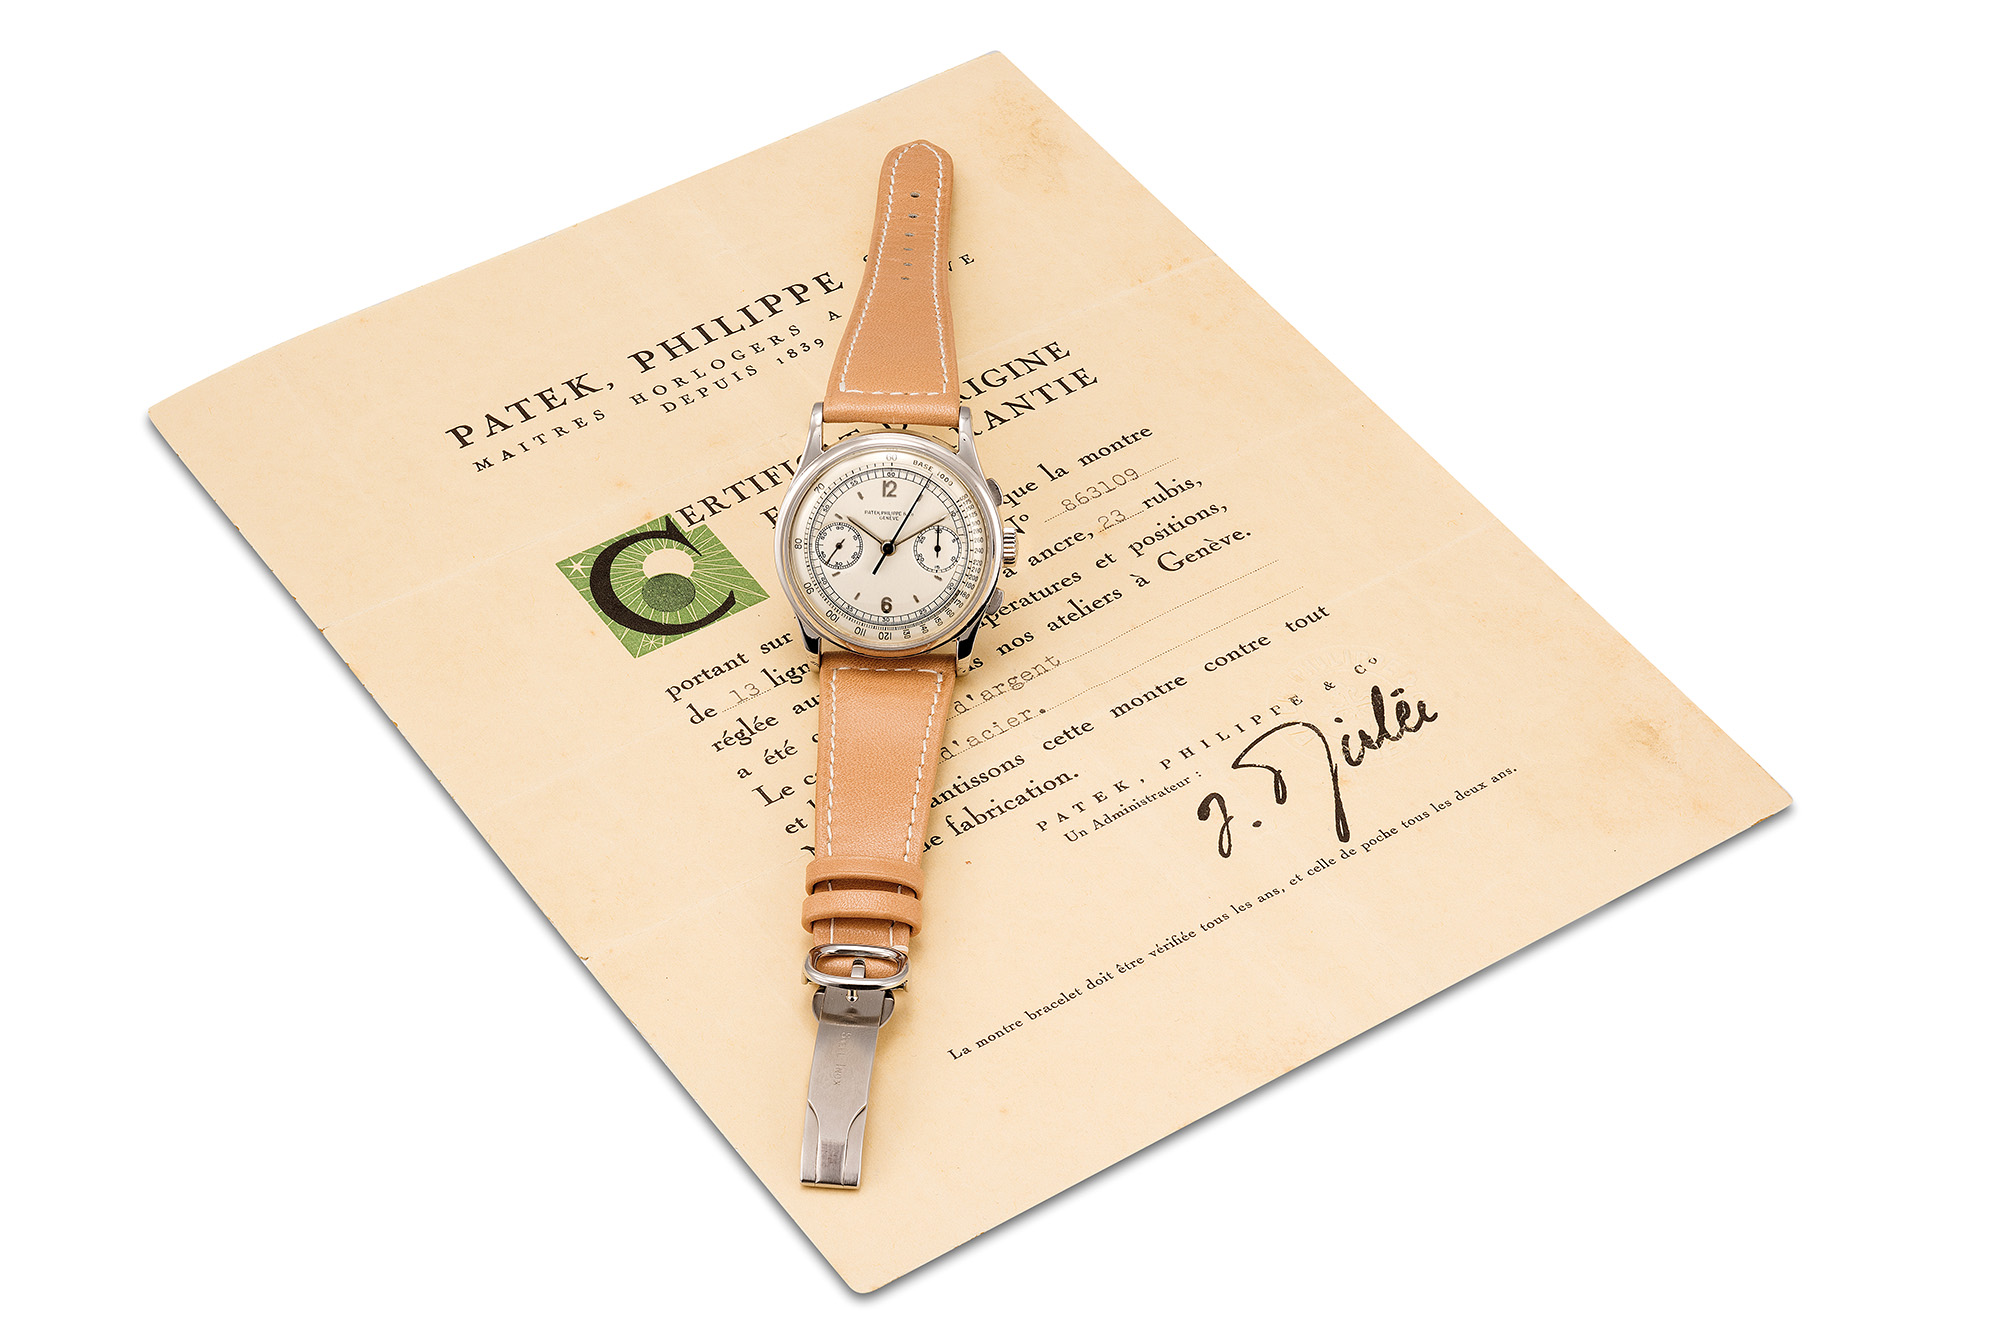 A very fine and important stainless steel chronograph wristwatch with original certificate, reference 530, manufactured in 1943